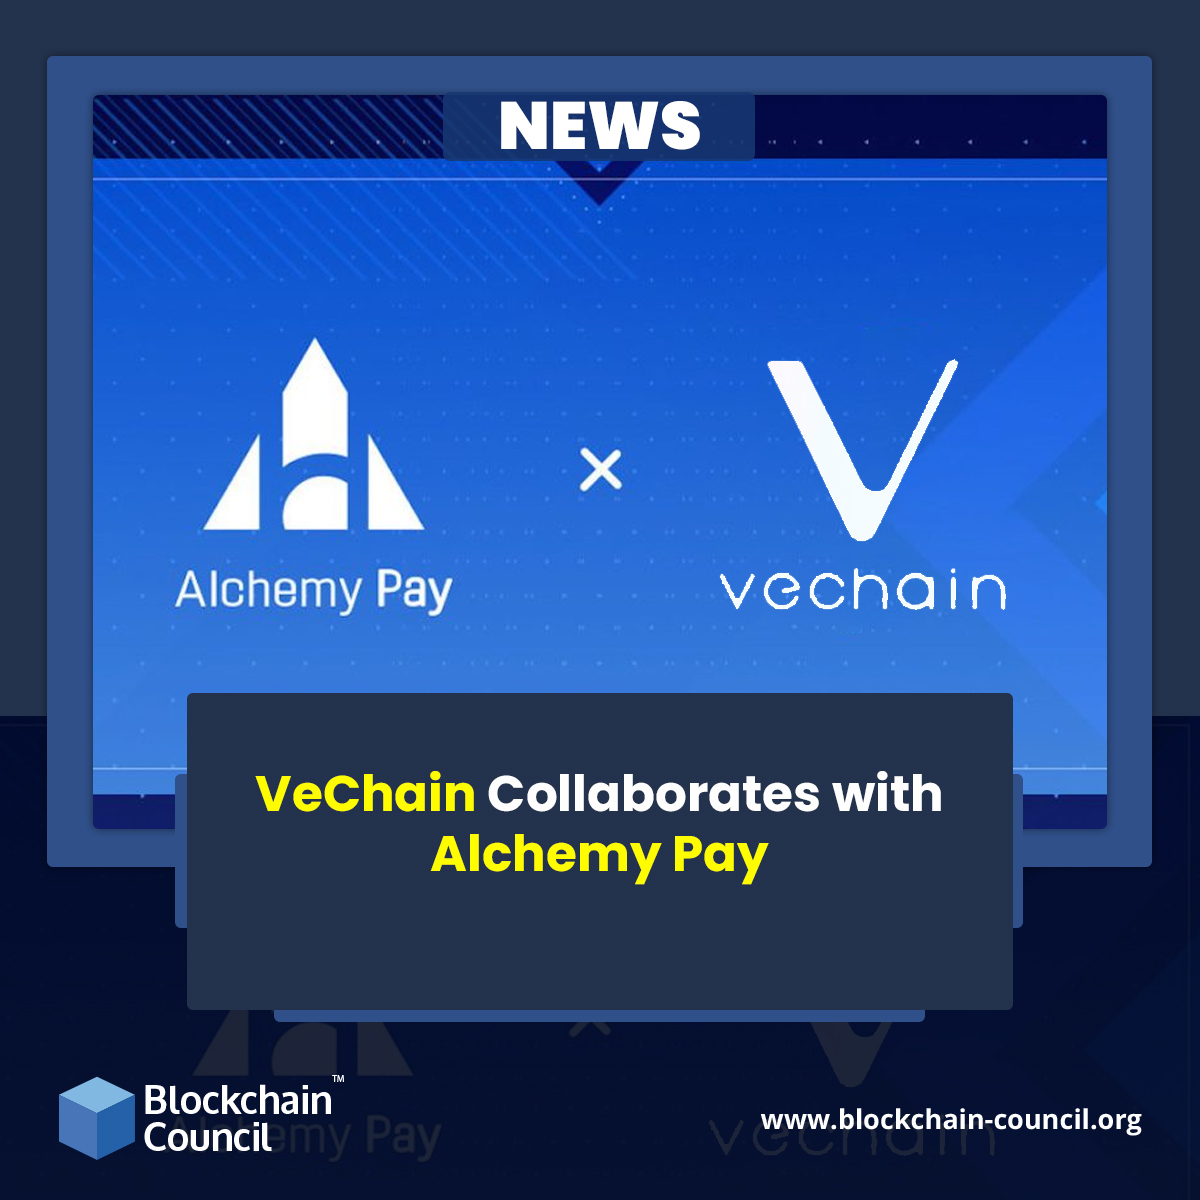 VeChain Collaborates with Alchemy Pay